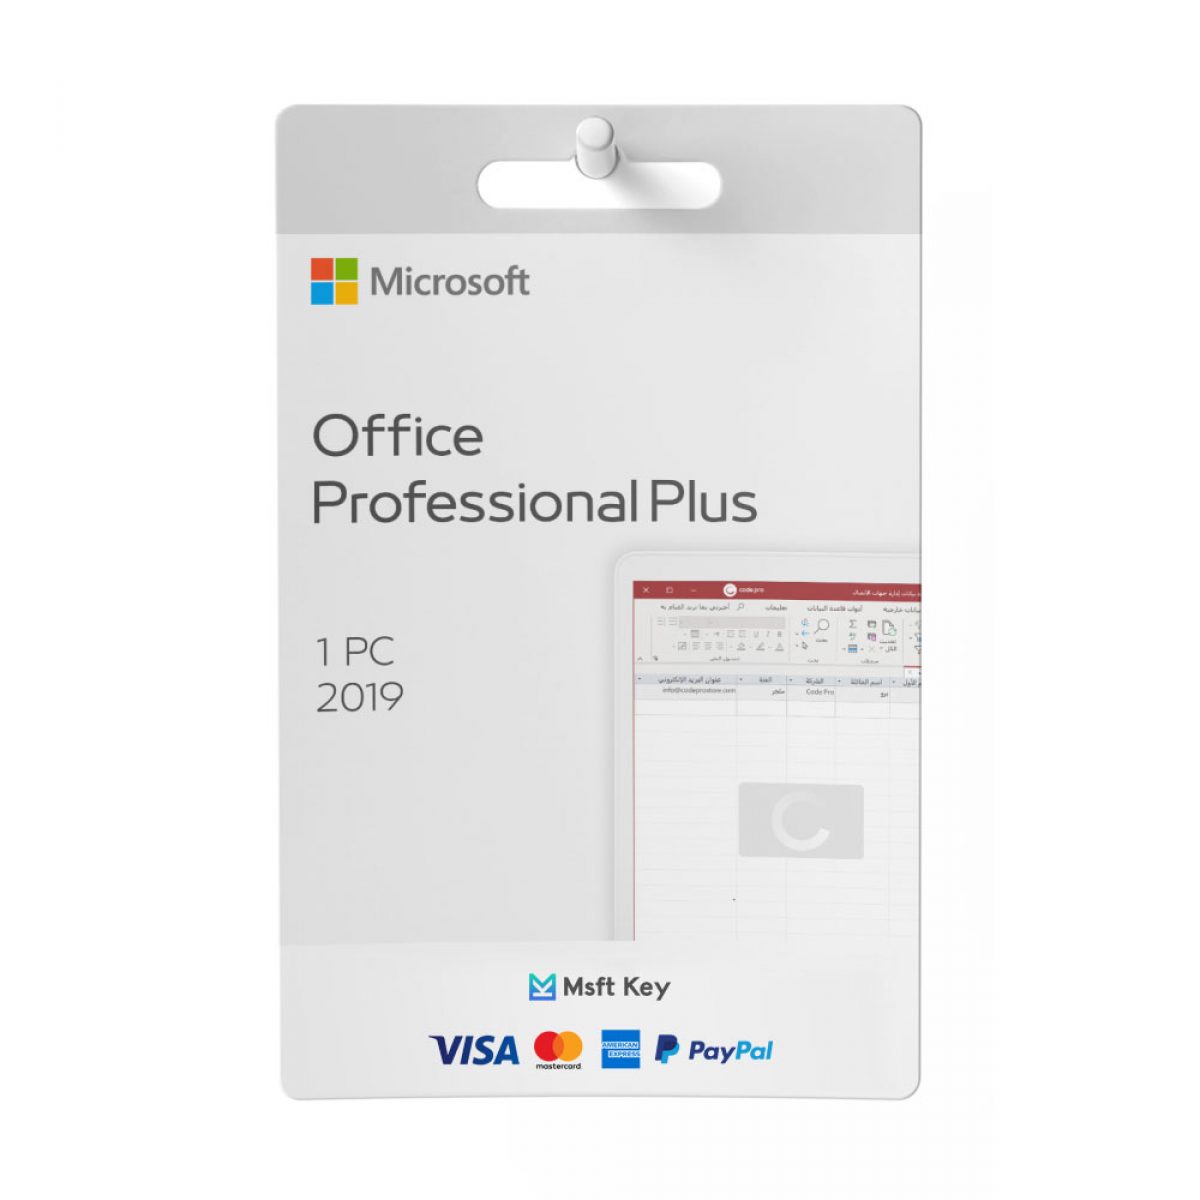 Microsoft Office Home & Business Product Key For 1MAC/PC , Lifetime, 2019 -  Degitore